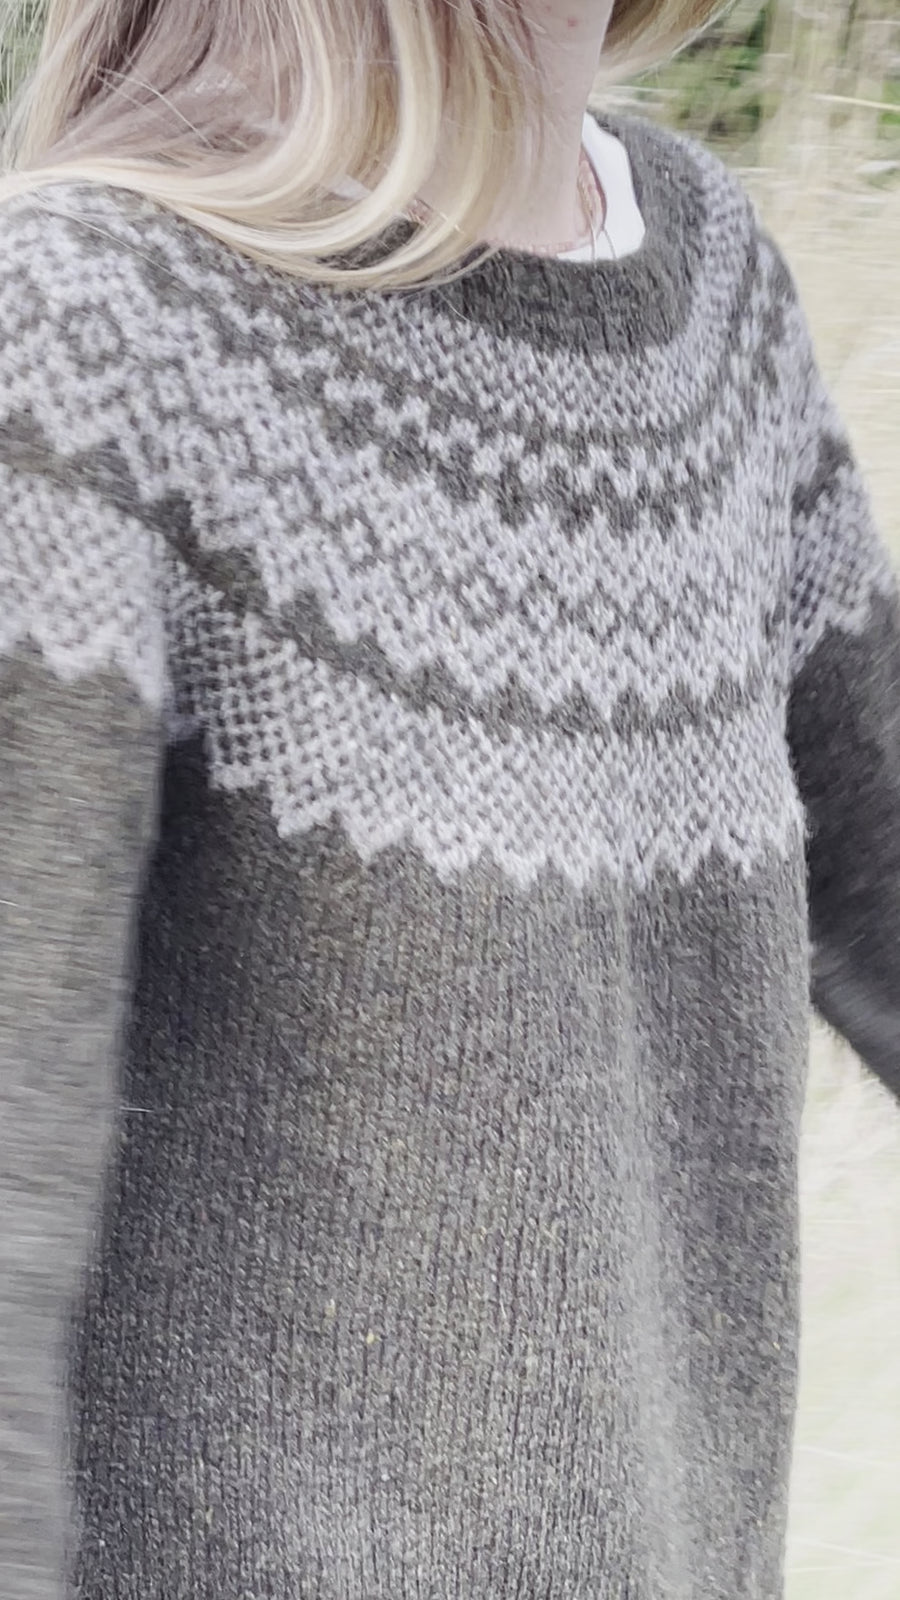 Biches & Bûches The Afterparty Sweater - pdf pattern in Japanese